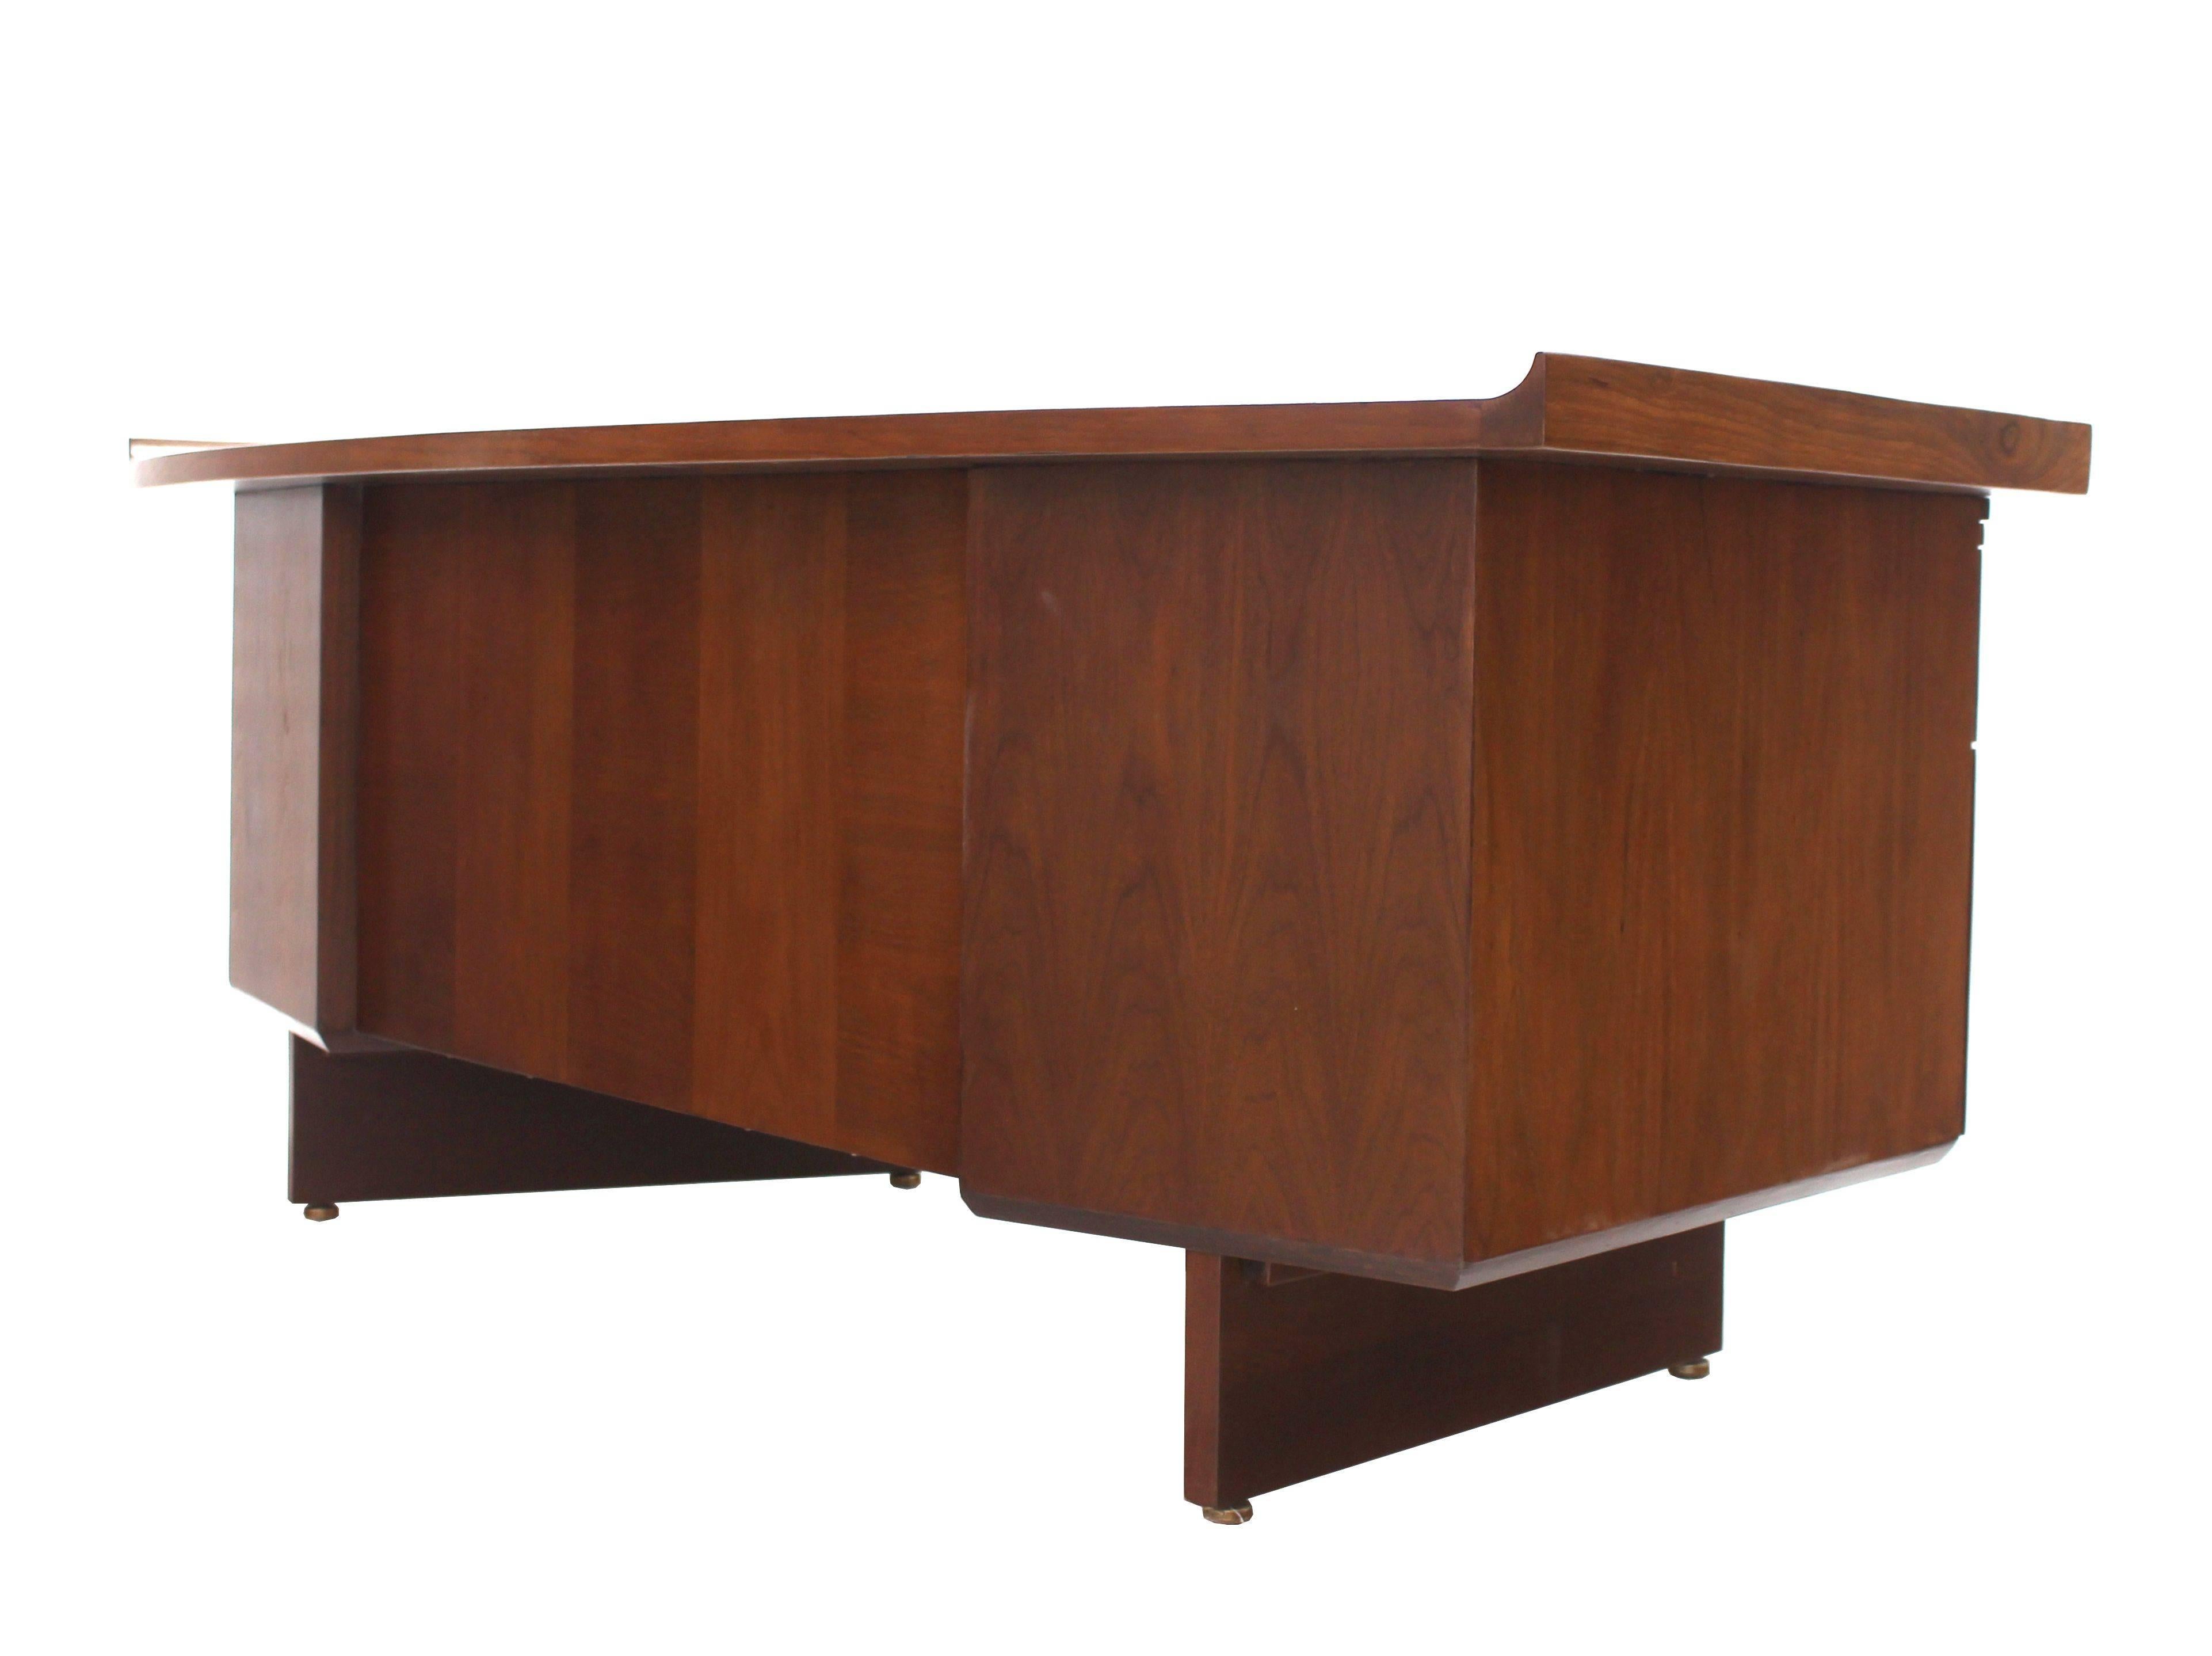 American Large Curved Top Walnut Executive Desk by Harvey Probber